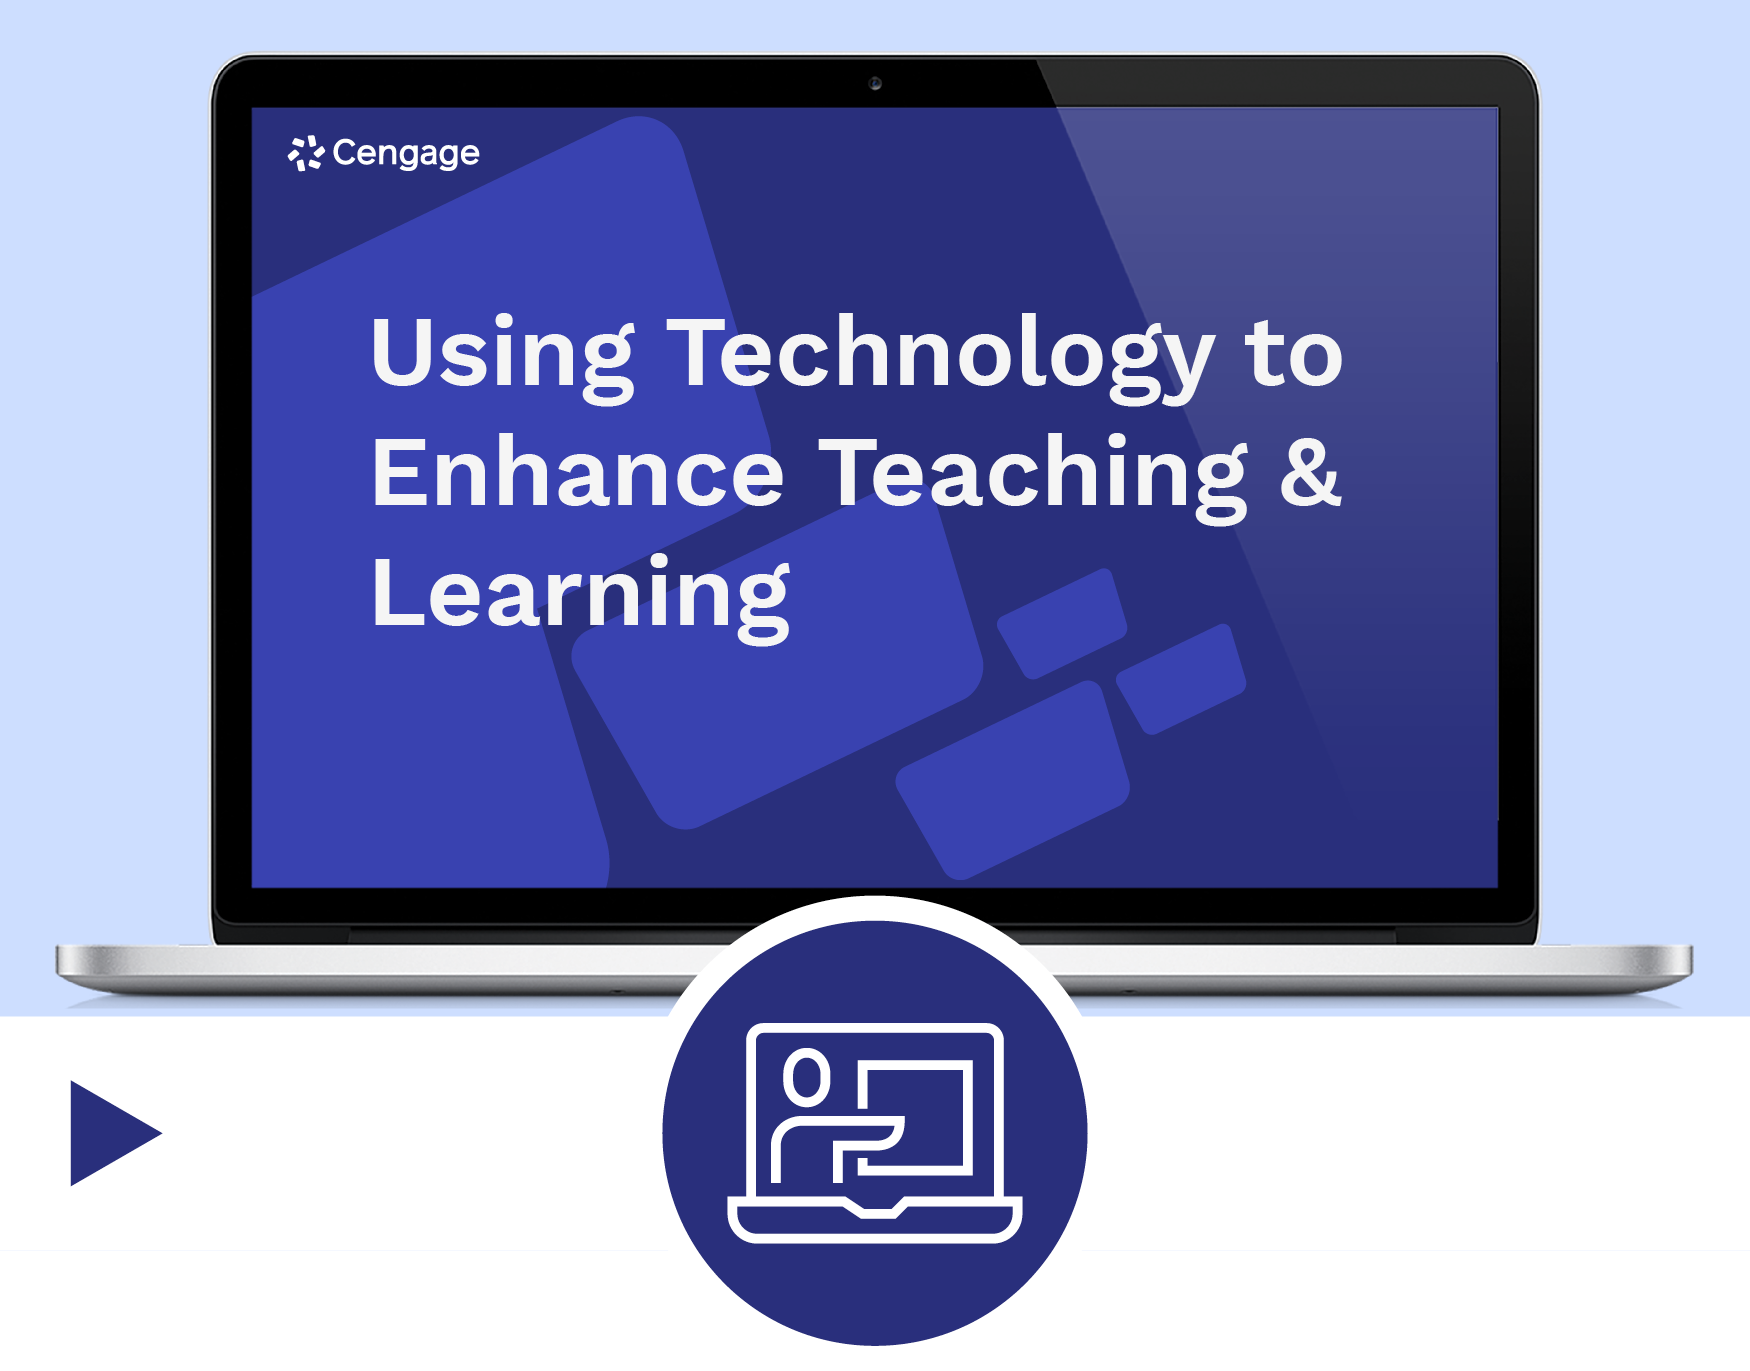 Using Technology to Enhance Teaching & Learning (English)<br/><br/>